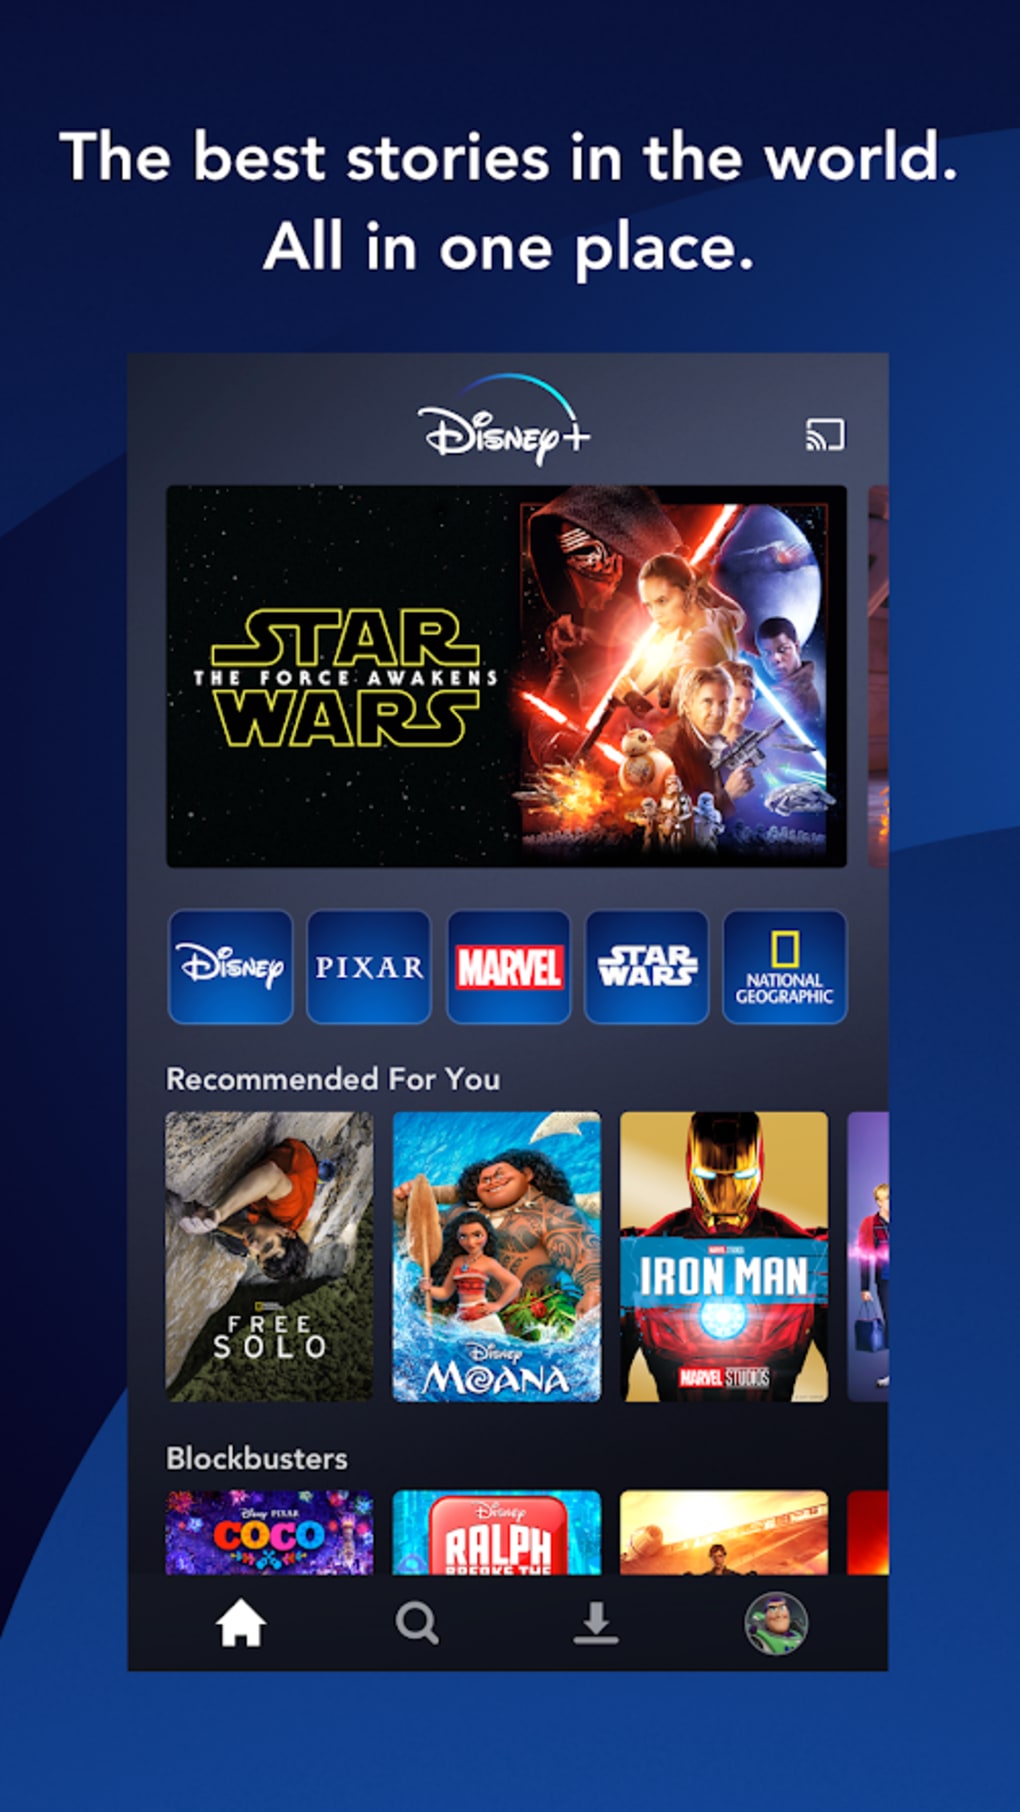 disney plus app android - Online Discount Shop for Electronics, Apparel,  Toys, Books, Games, Computers, Shoes, Jewelry, Watches, Baby Products,  Sports & Outdoors, Office Products, Bed & Bath, Furniture, Tools, Hardware,  Automotive